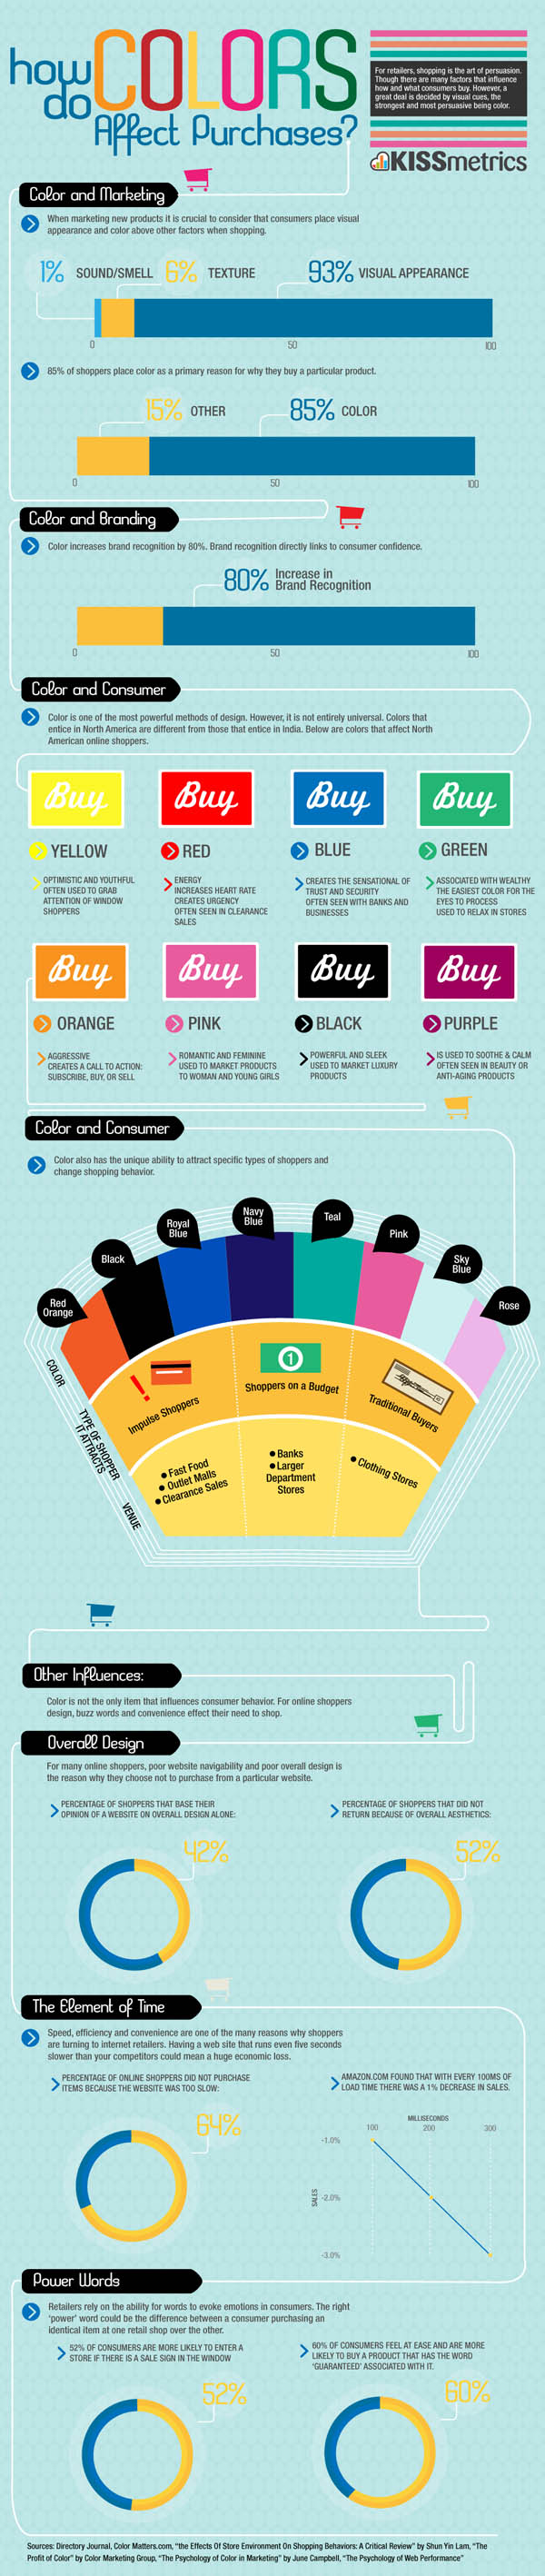 how-do-colors-affect-purchases